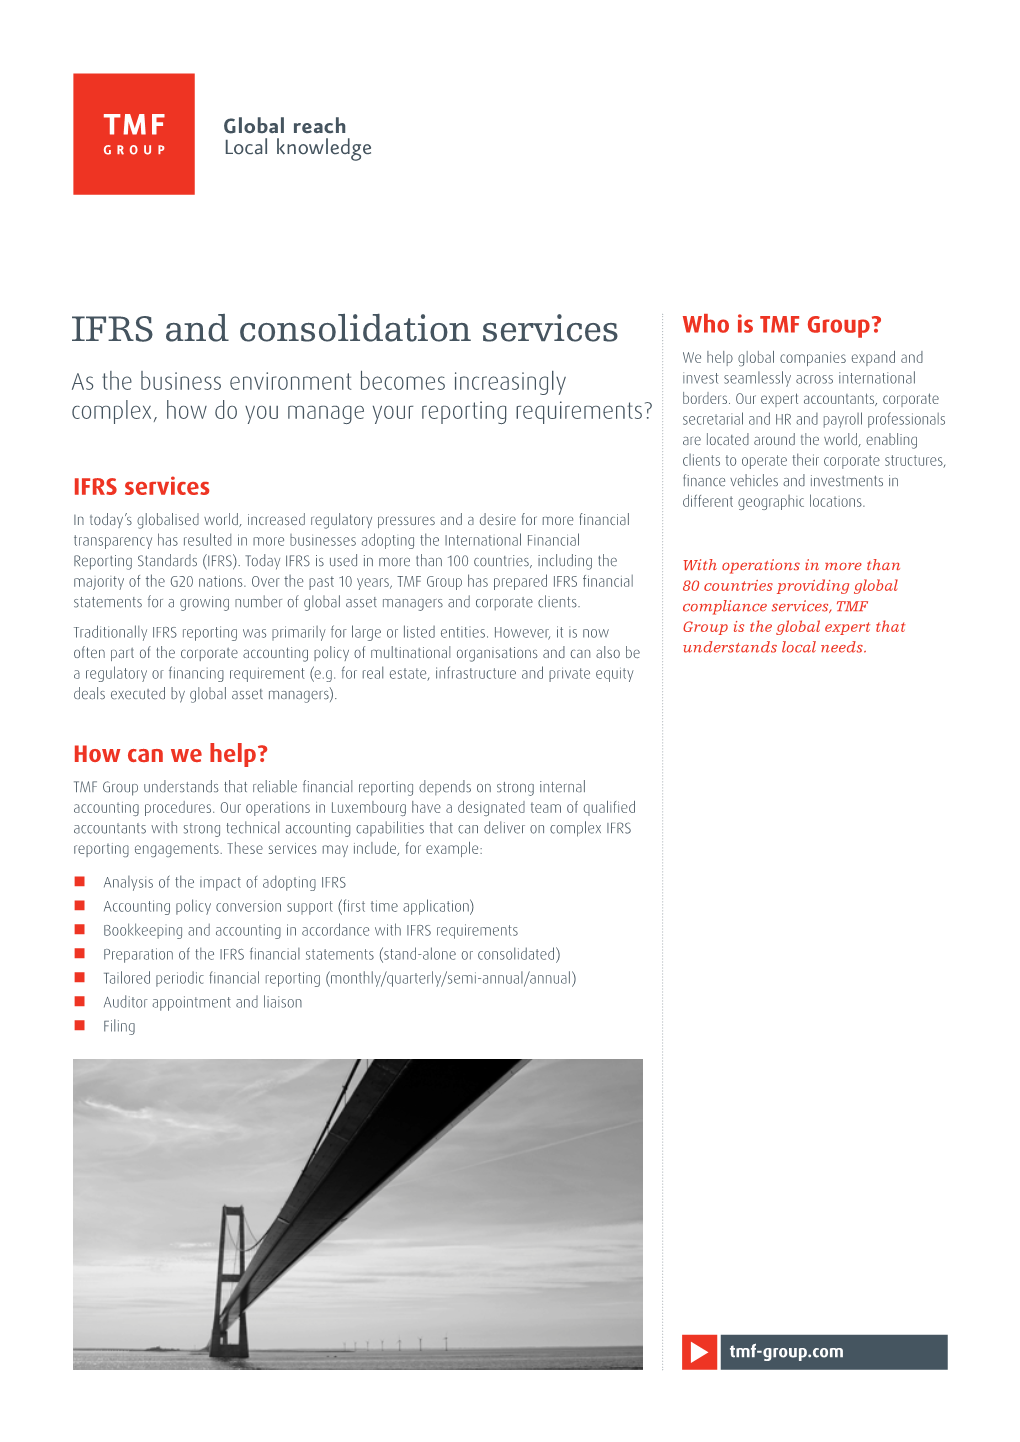 IFRS and Consolidation Services